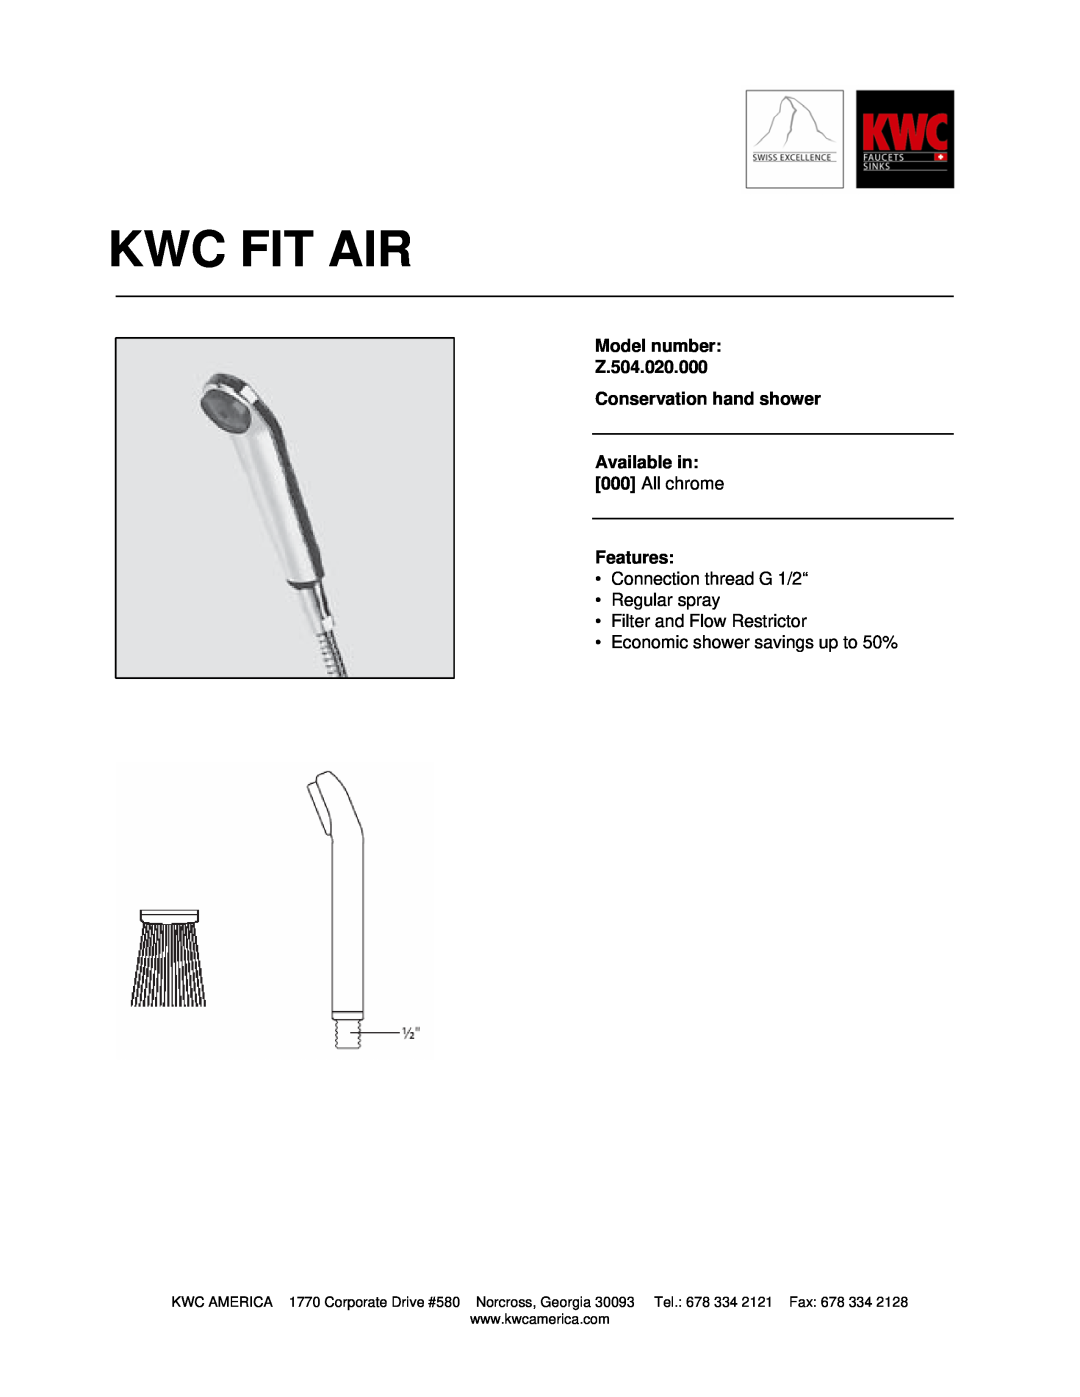 KWC manual Kwc Fit Air, Model number Z.504.020.000, Conservation hand shower Available in, All chrome, Features 